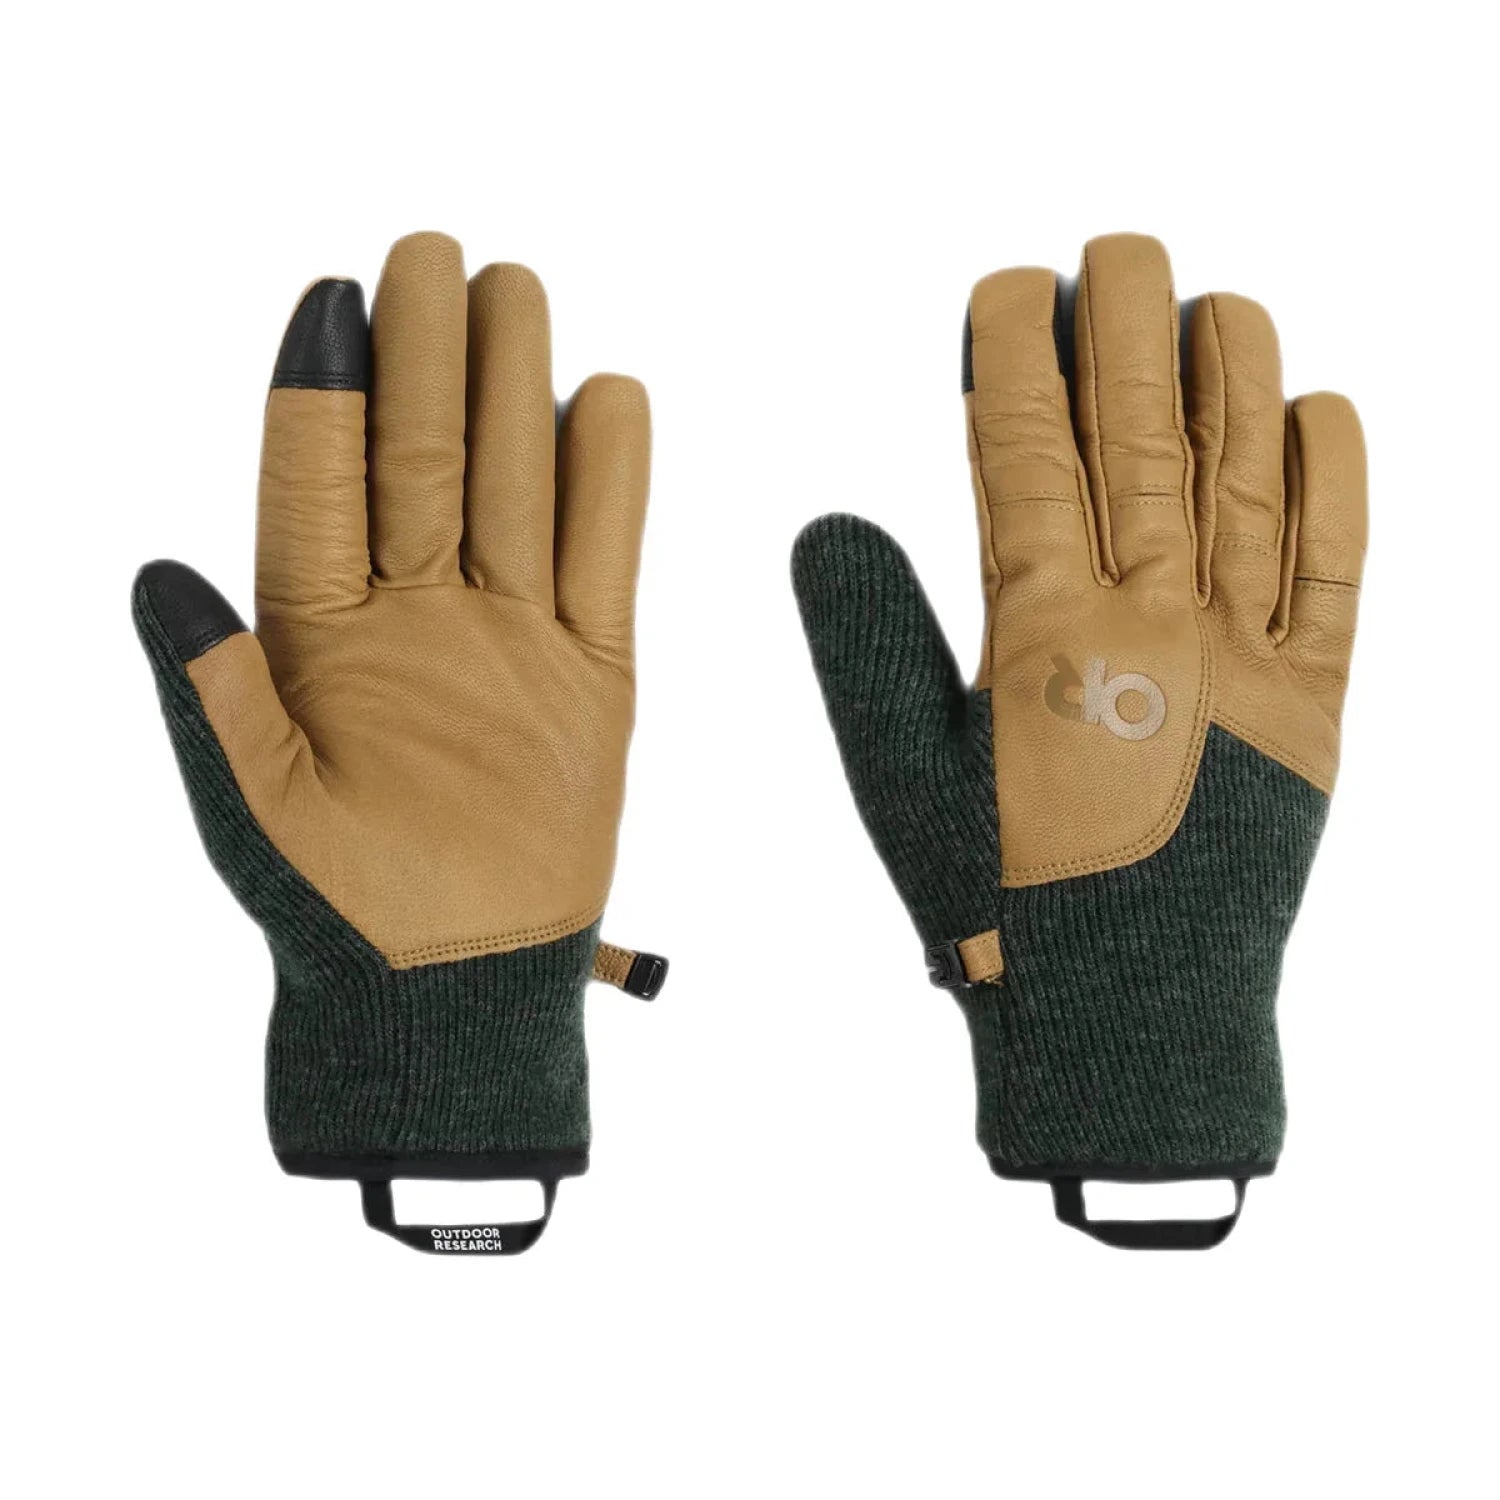 Outdoor Research Men's Flurry Driving Gloves shown in the Grove color option. Front and back view.